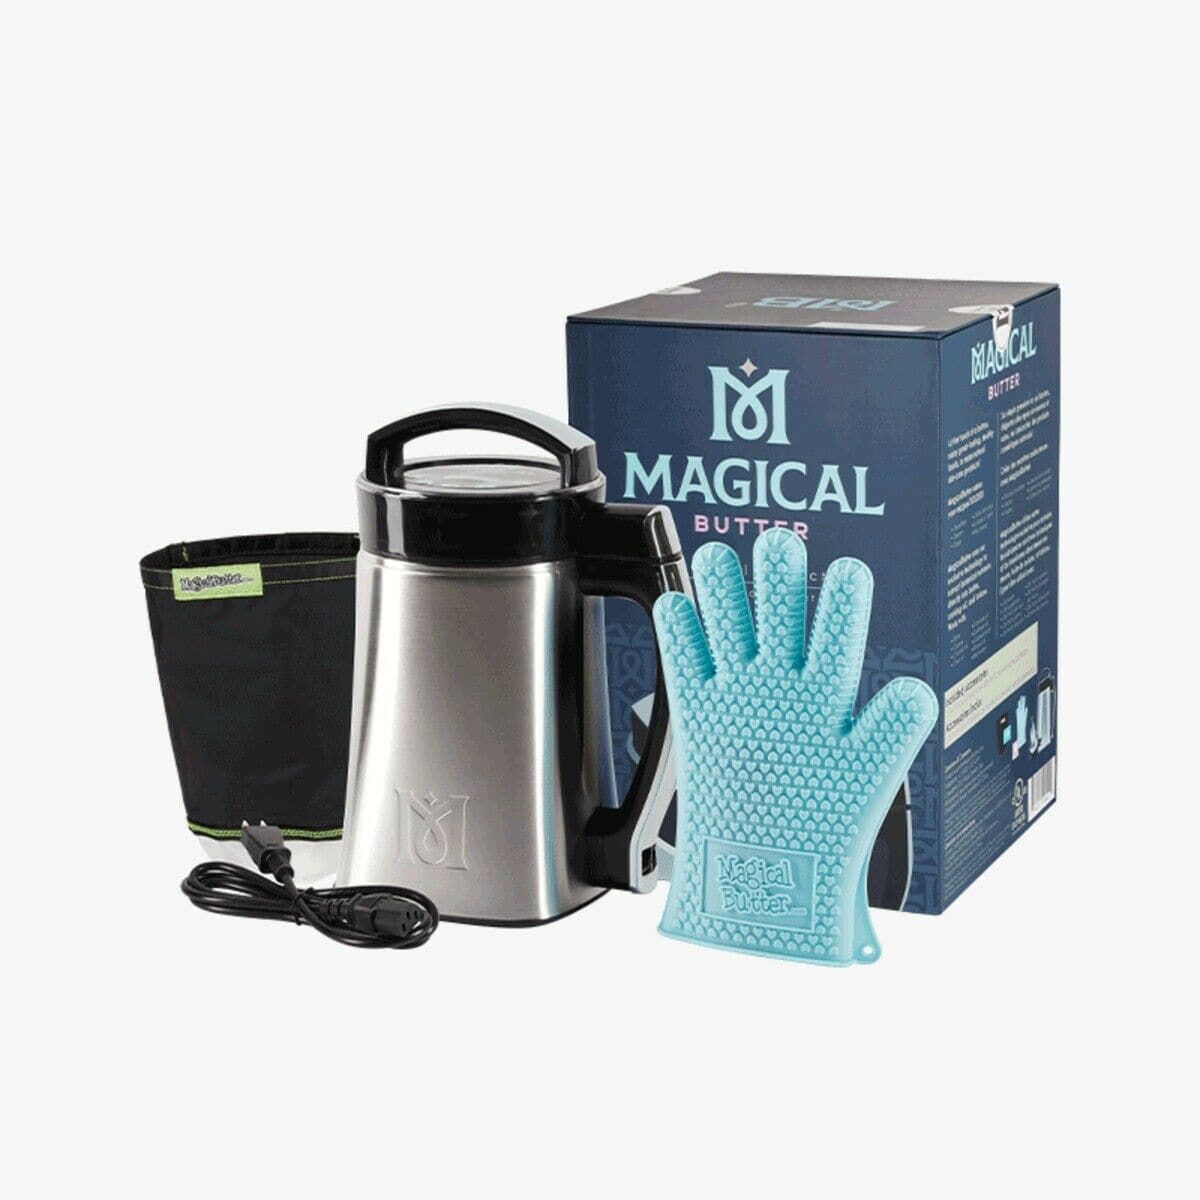 MagicalButter Machine MB2e Botanical Extractor Machine for